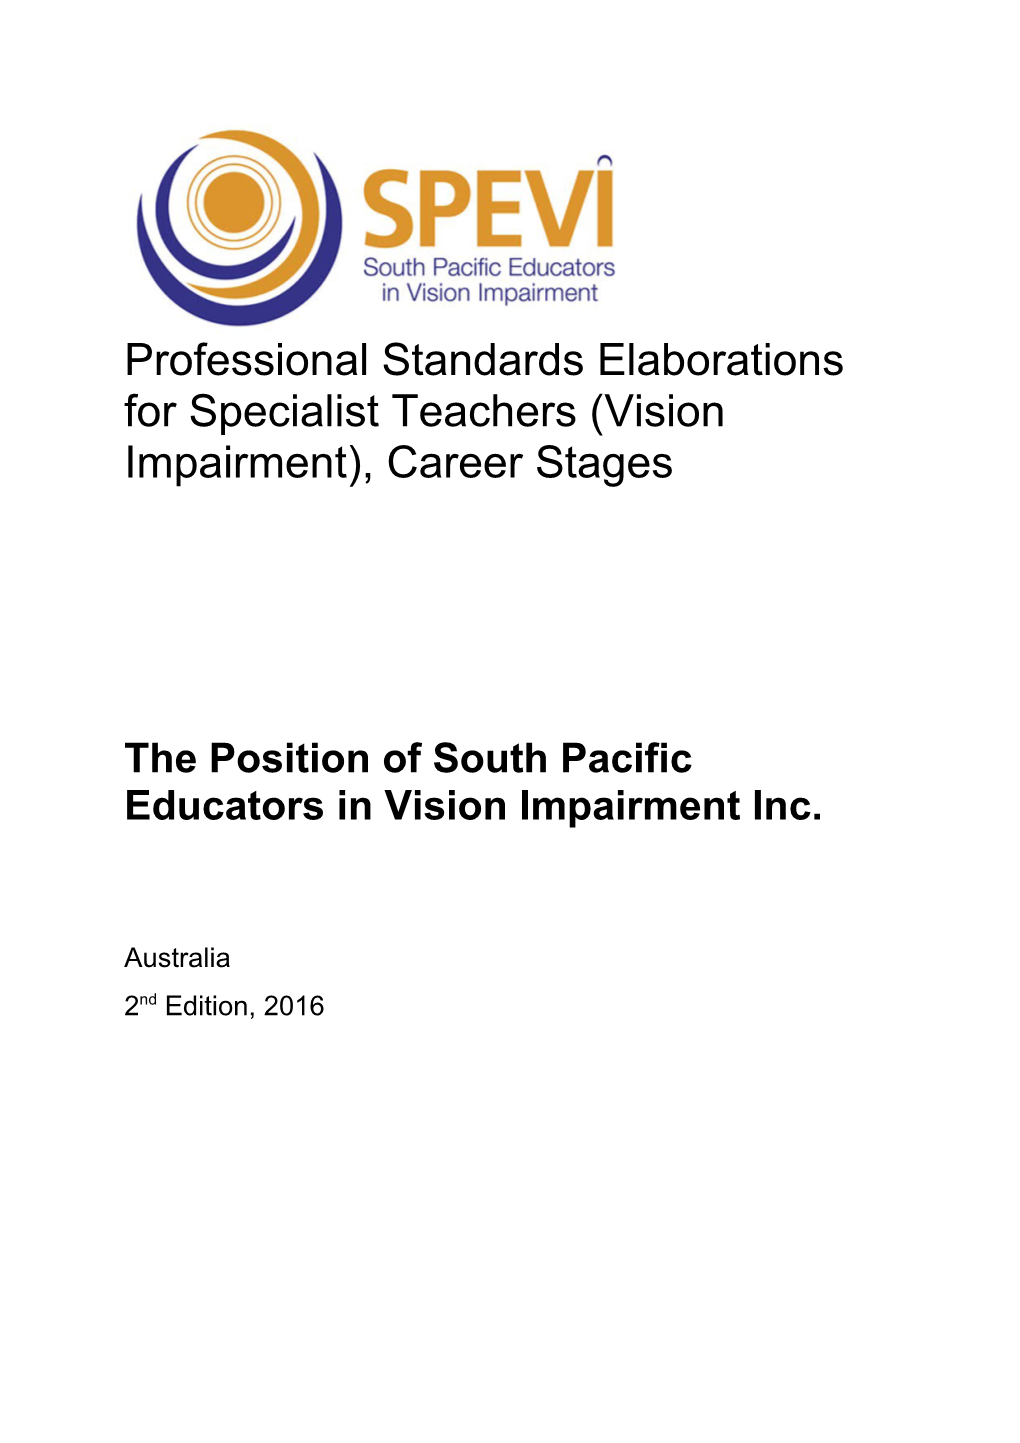 The Position of South Pacific Educators in Vision Impairment Inc